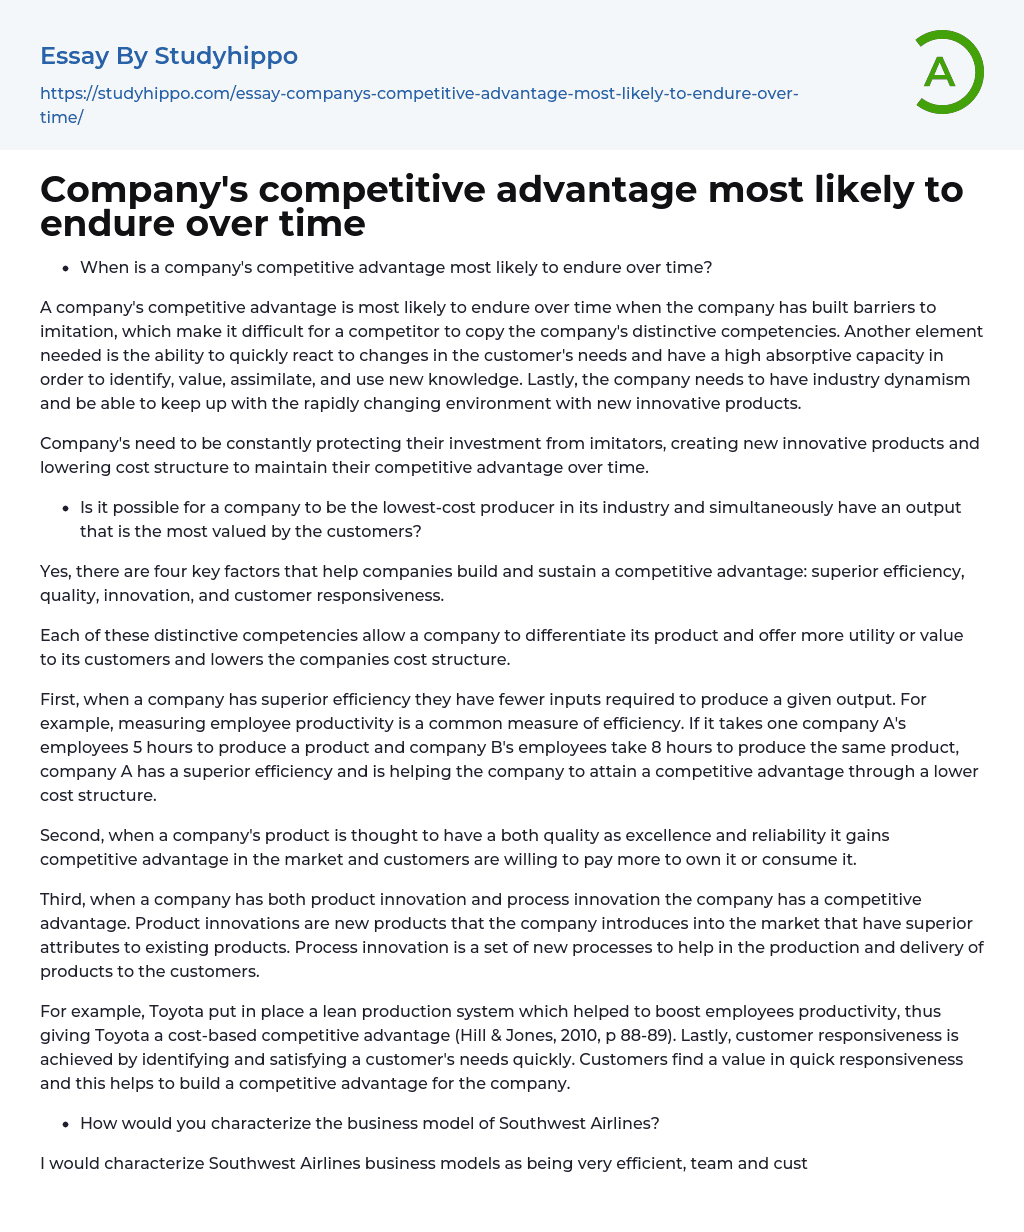 Company’s competitive advantage most likely to endure over time Essay Example